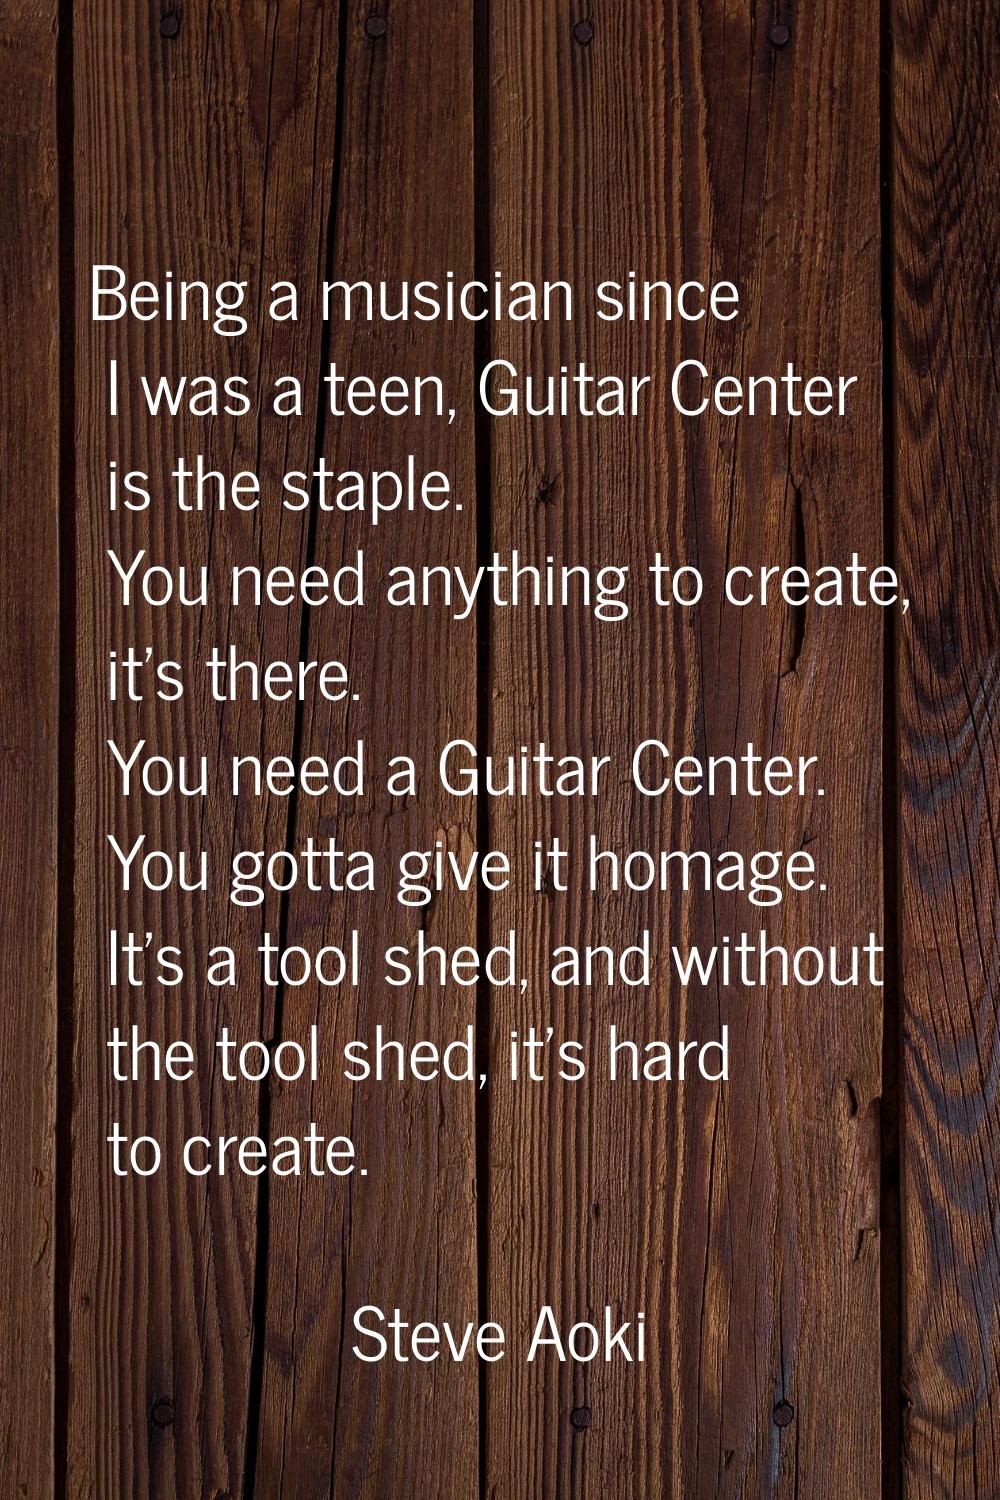 Being a musician since I was a teen, Guitar Center is the staple. You need anything to create, it's